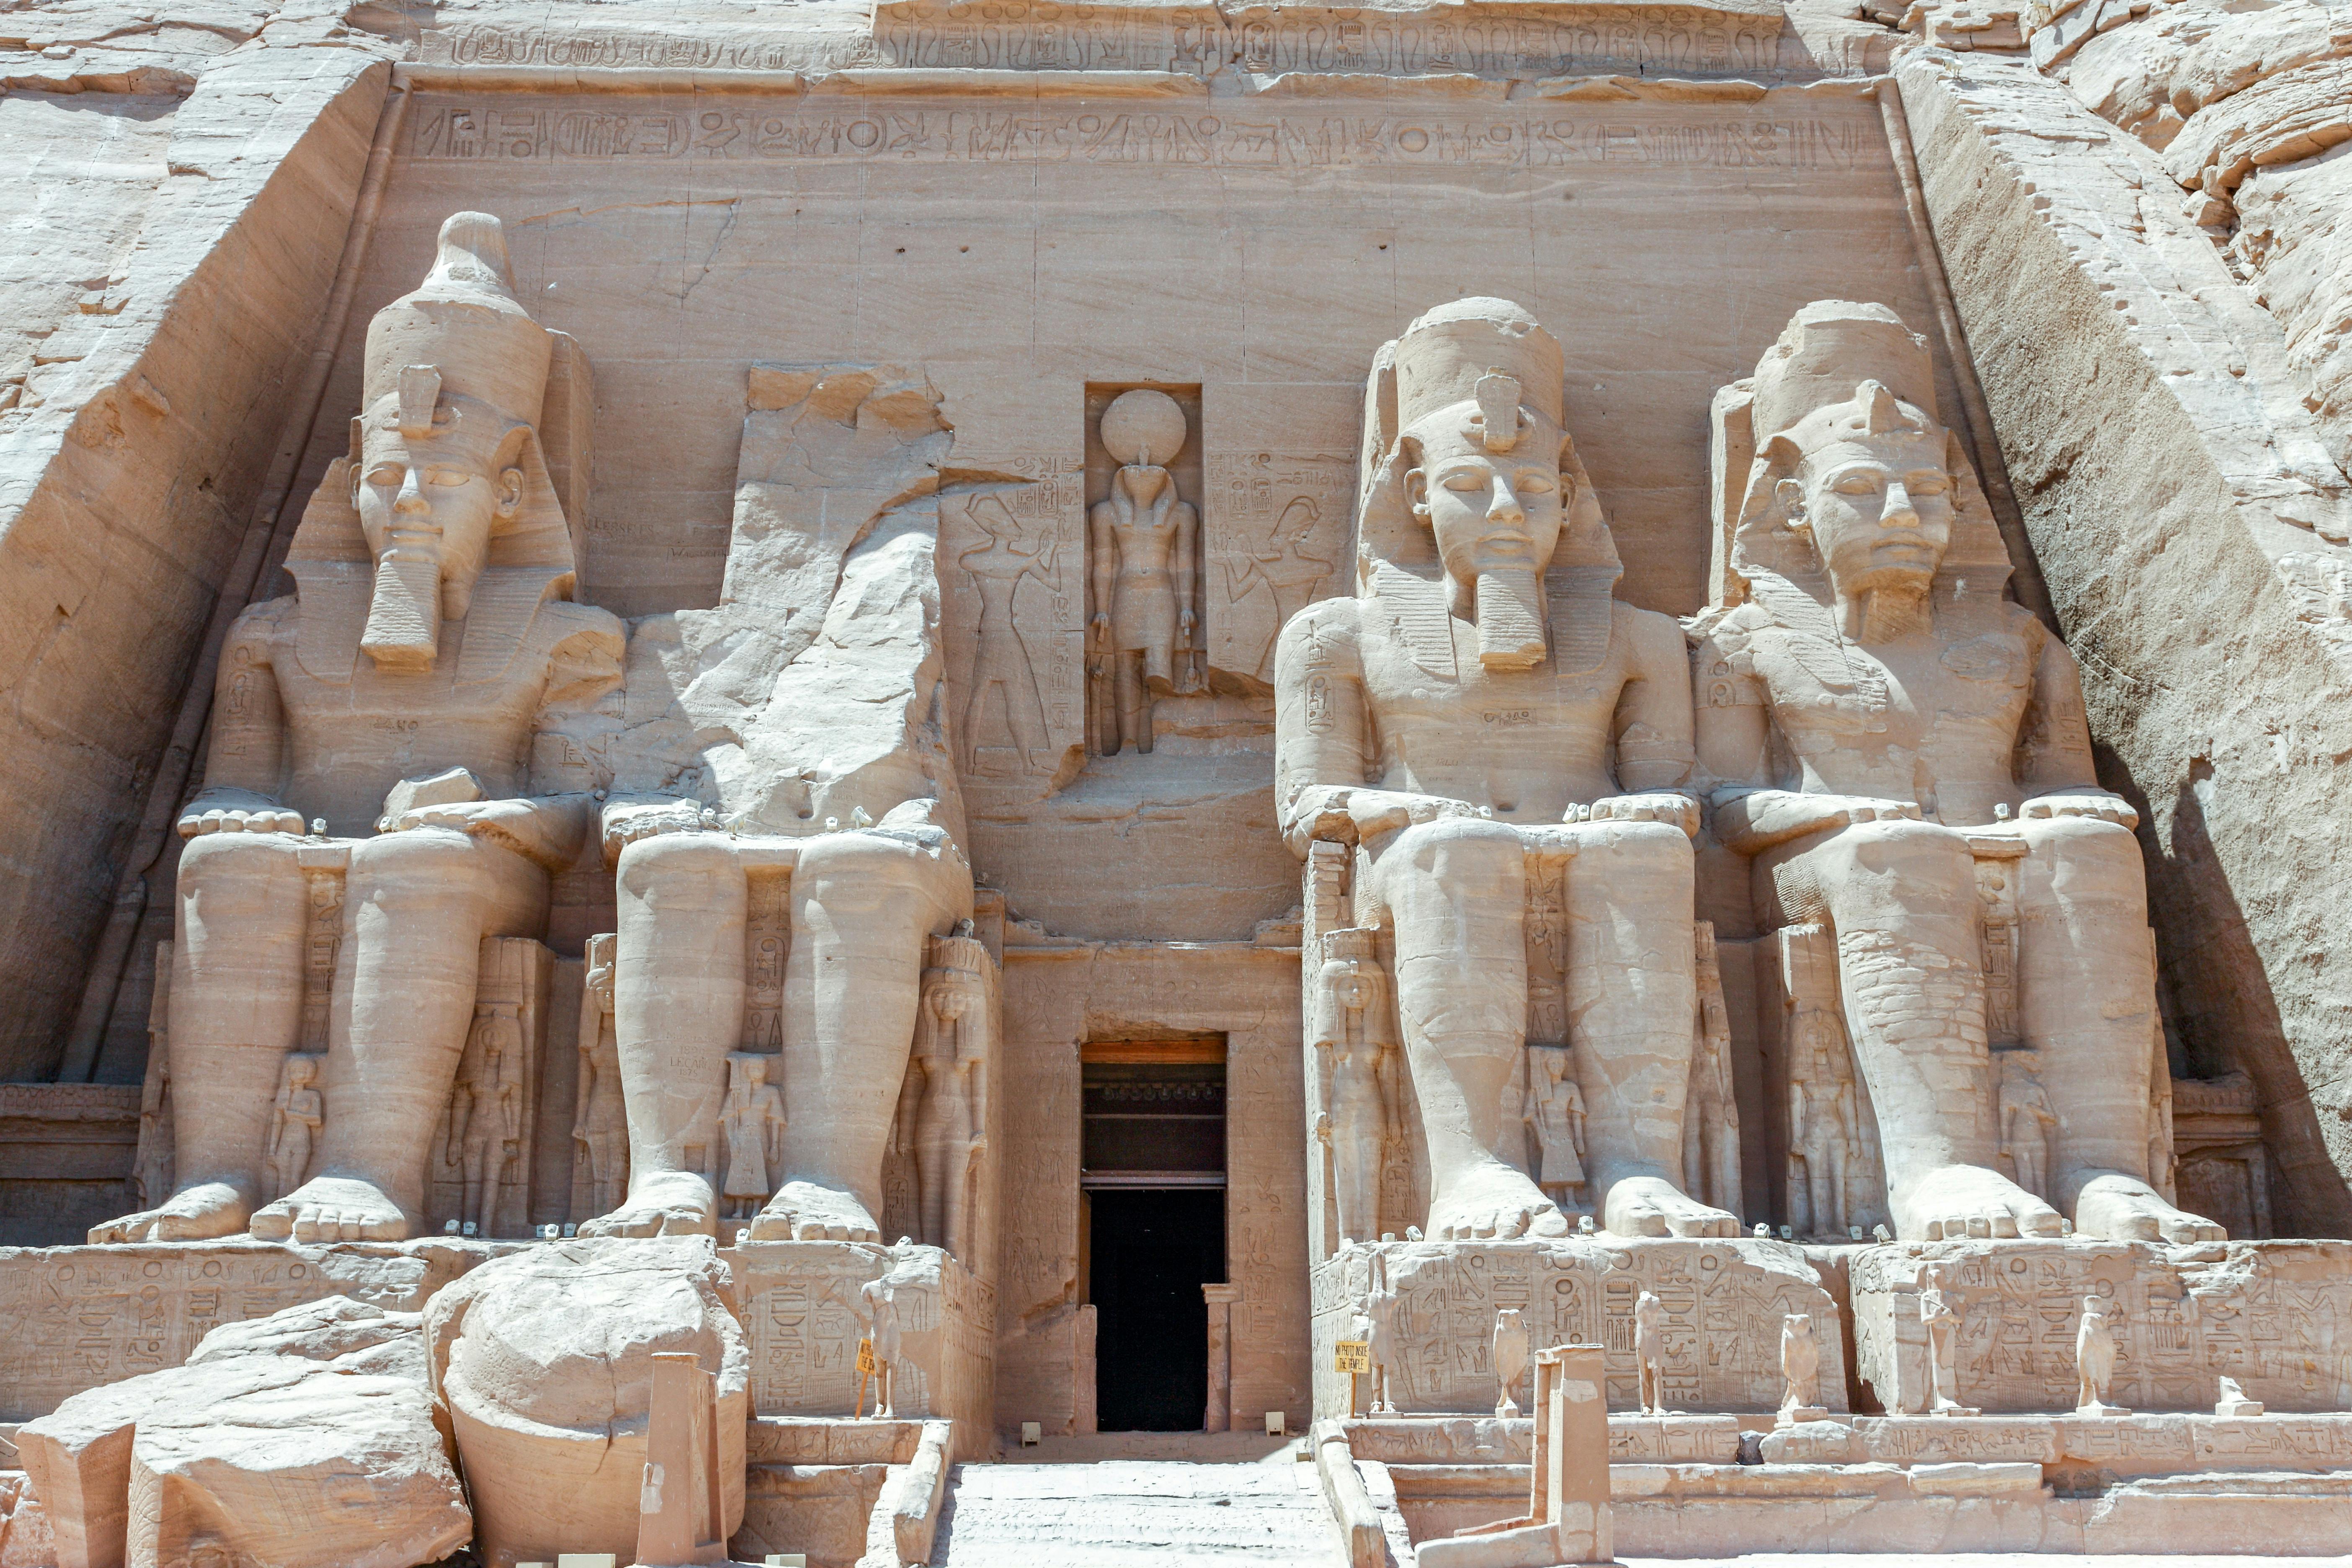 The well preserved Abu Simbel temples in Egypt